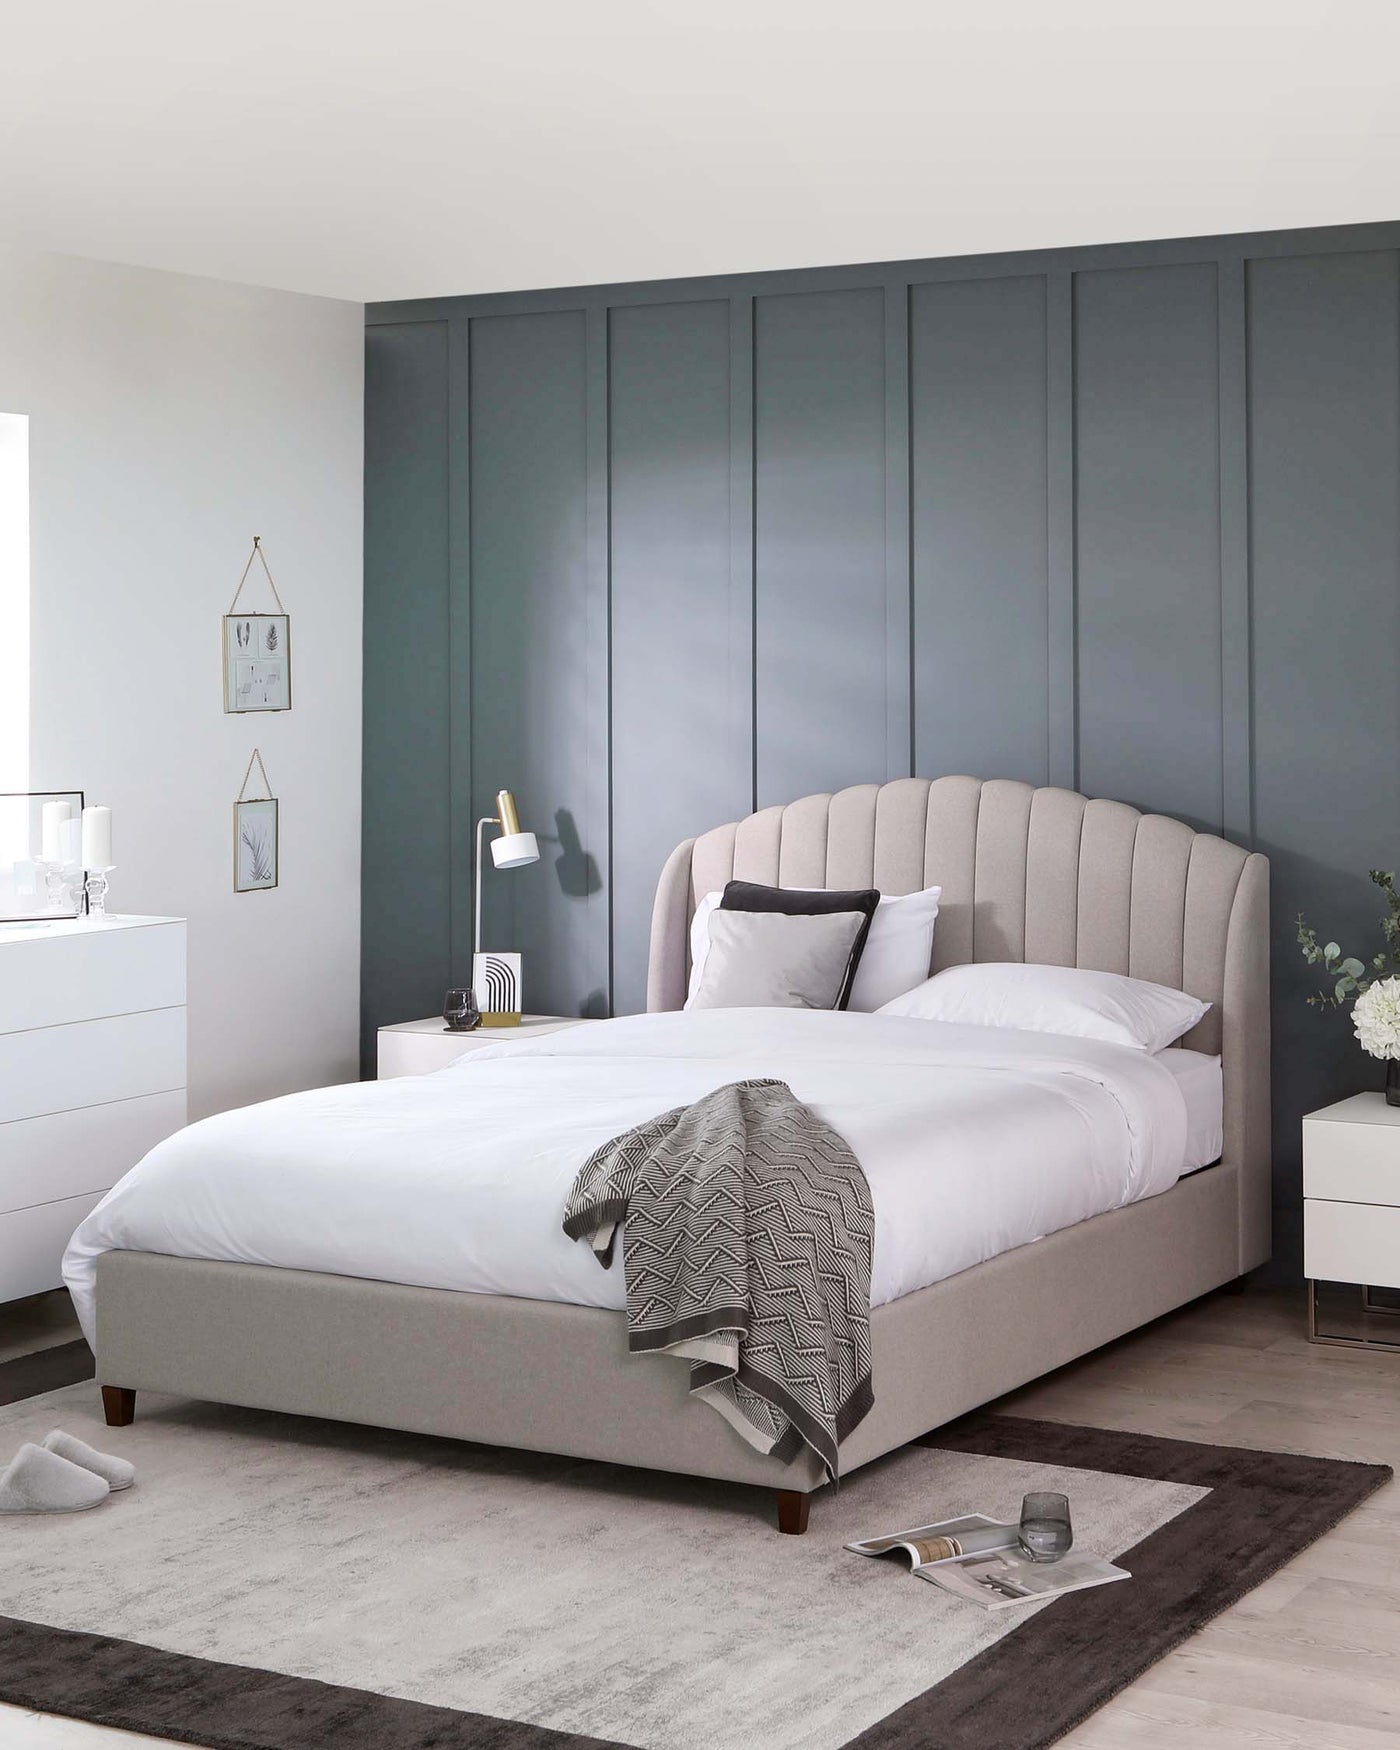 Elegant contemporary bedroom furniture set featuring a large upholstered bed with a curved, tufted headboard in a light beige fabric, accompanied by a sleek white bedside table with drawers and a matching white dresser with ample storage. The room is accented with a plush grey area rug beneath the bed.